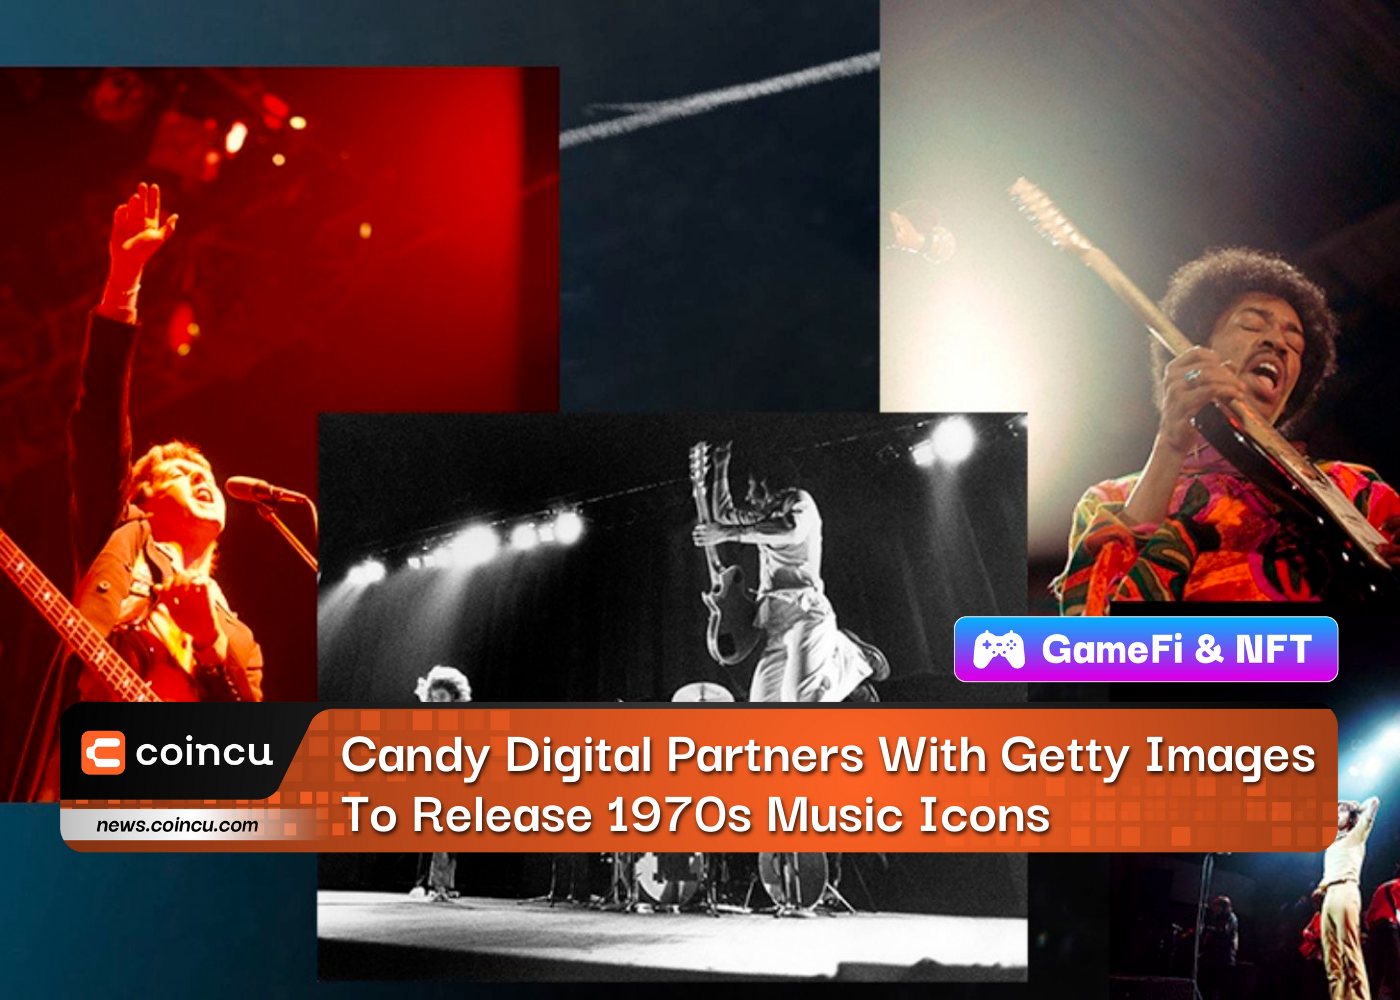 Candy Digital Partners With Getty Images To Release 1970s Music Icons